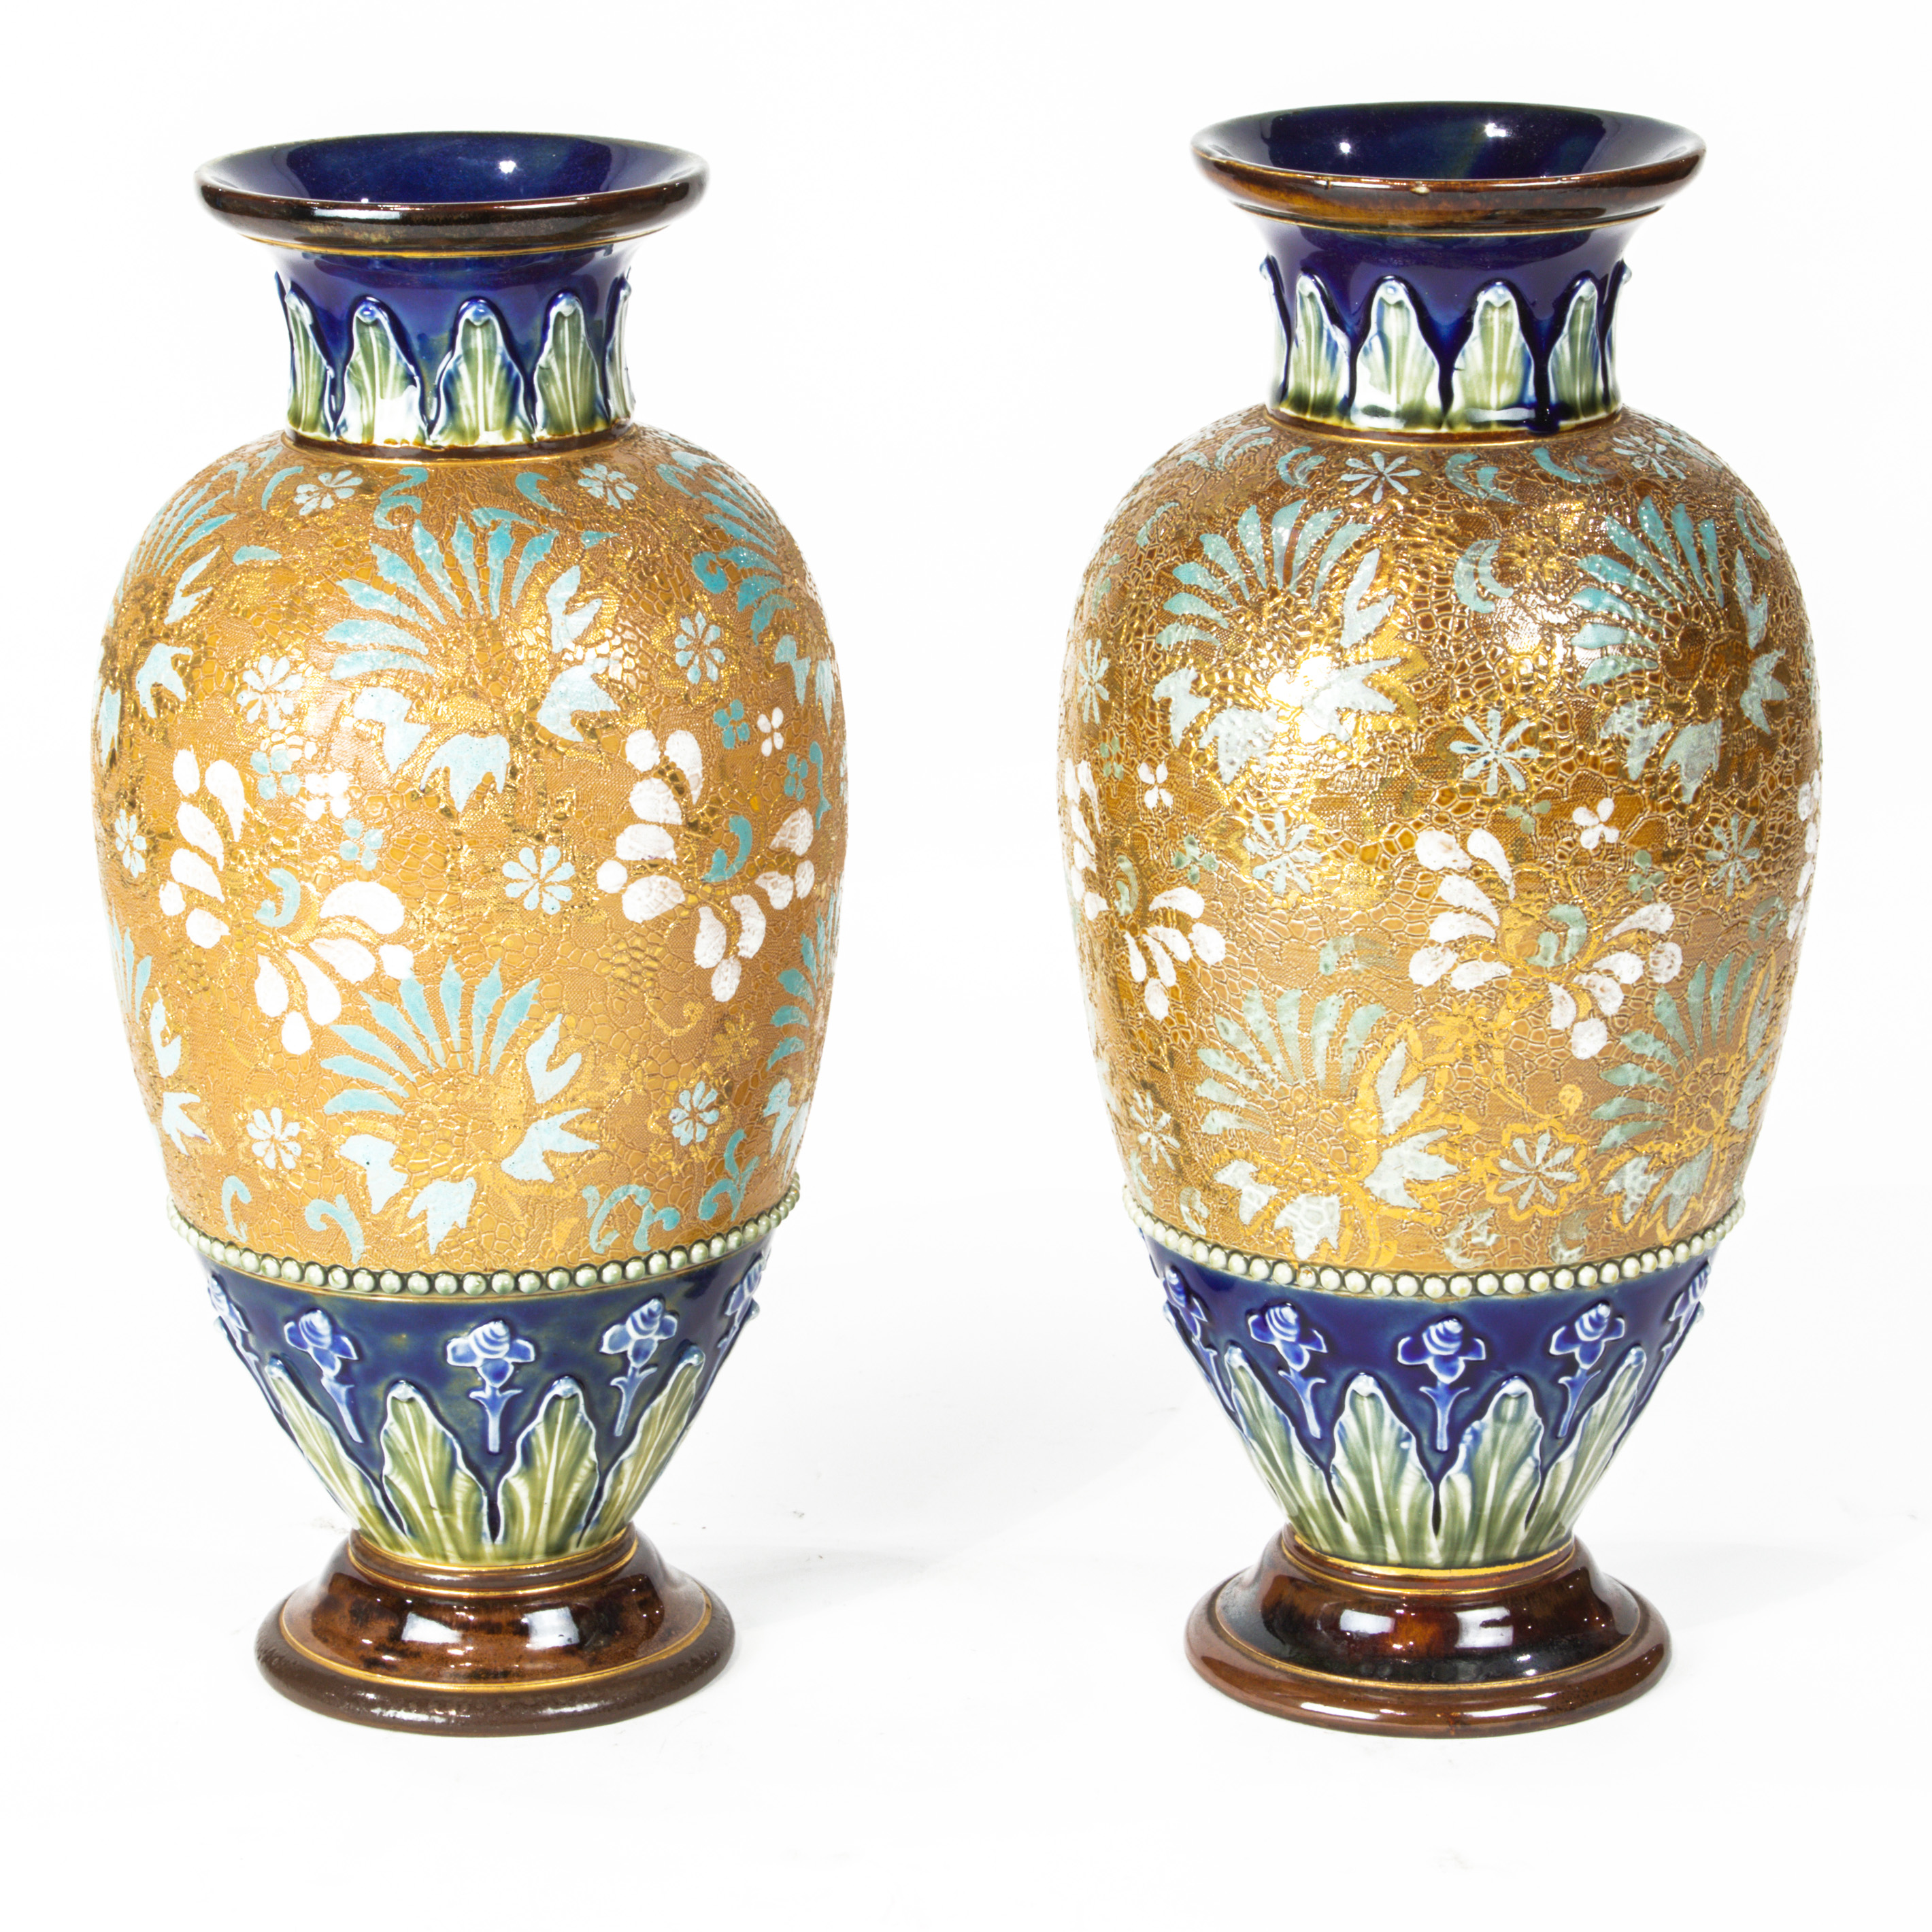 PAIR OF ROYAL DOULTON CABINET VASES